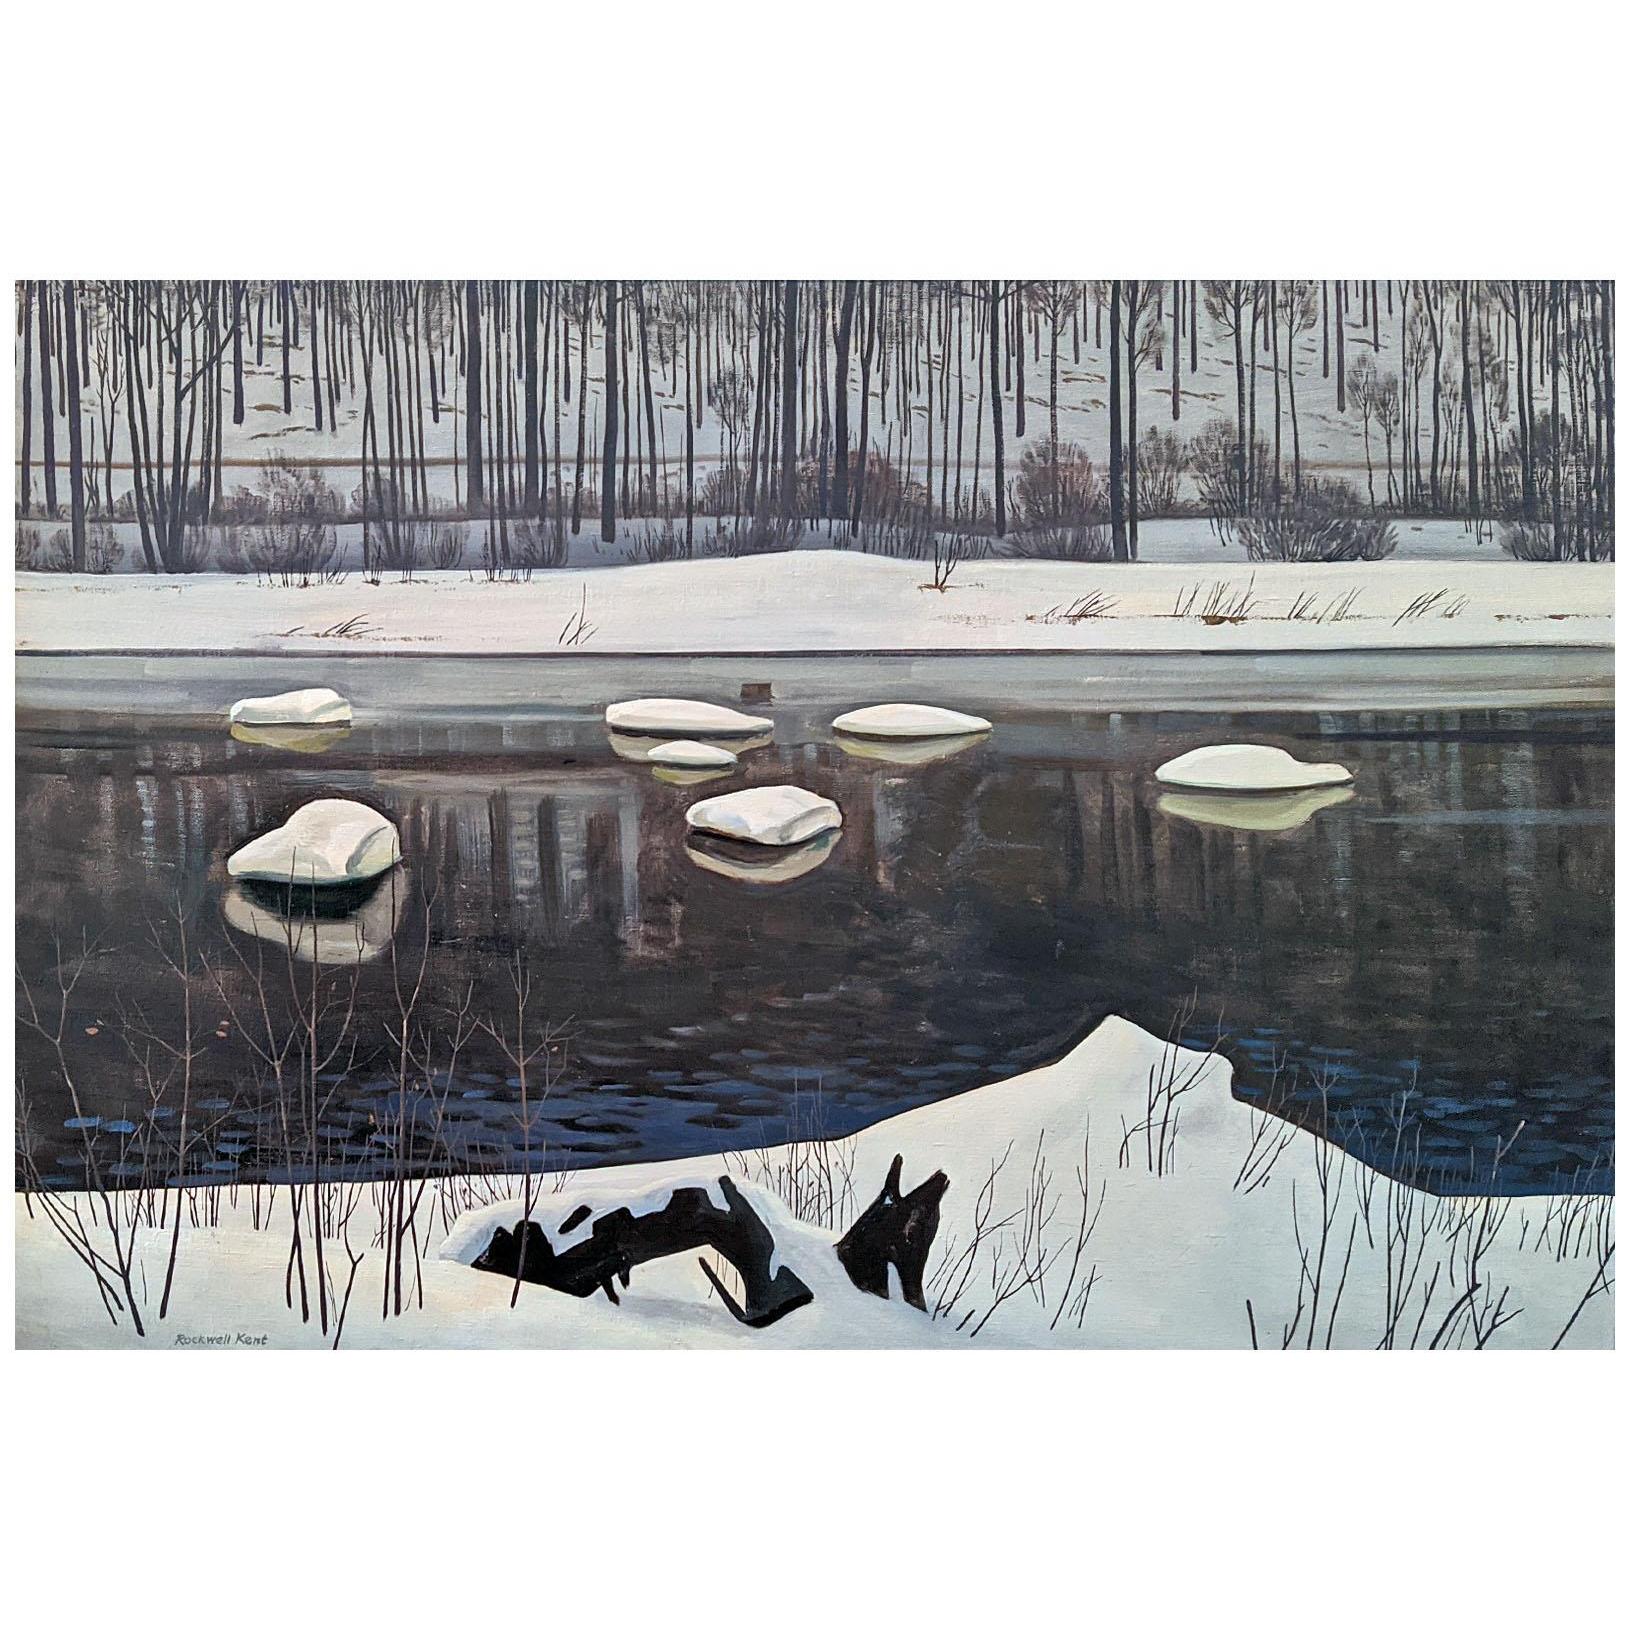 Rockwell Kent. Au Sable River. Winter. 1960. Hermitage Museum